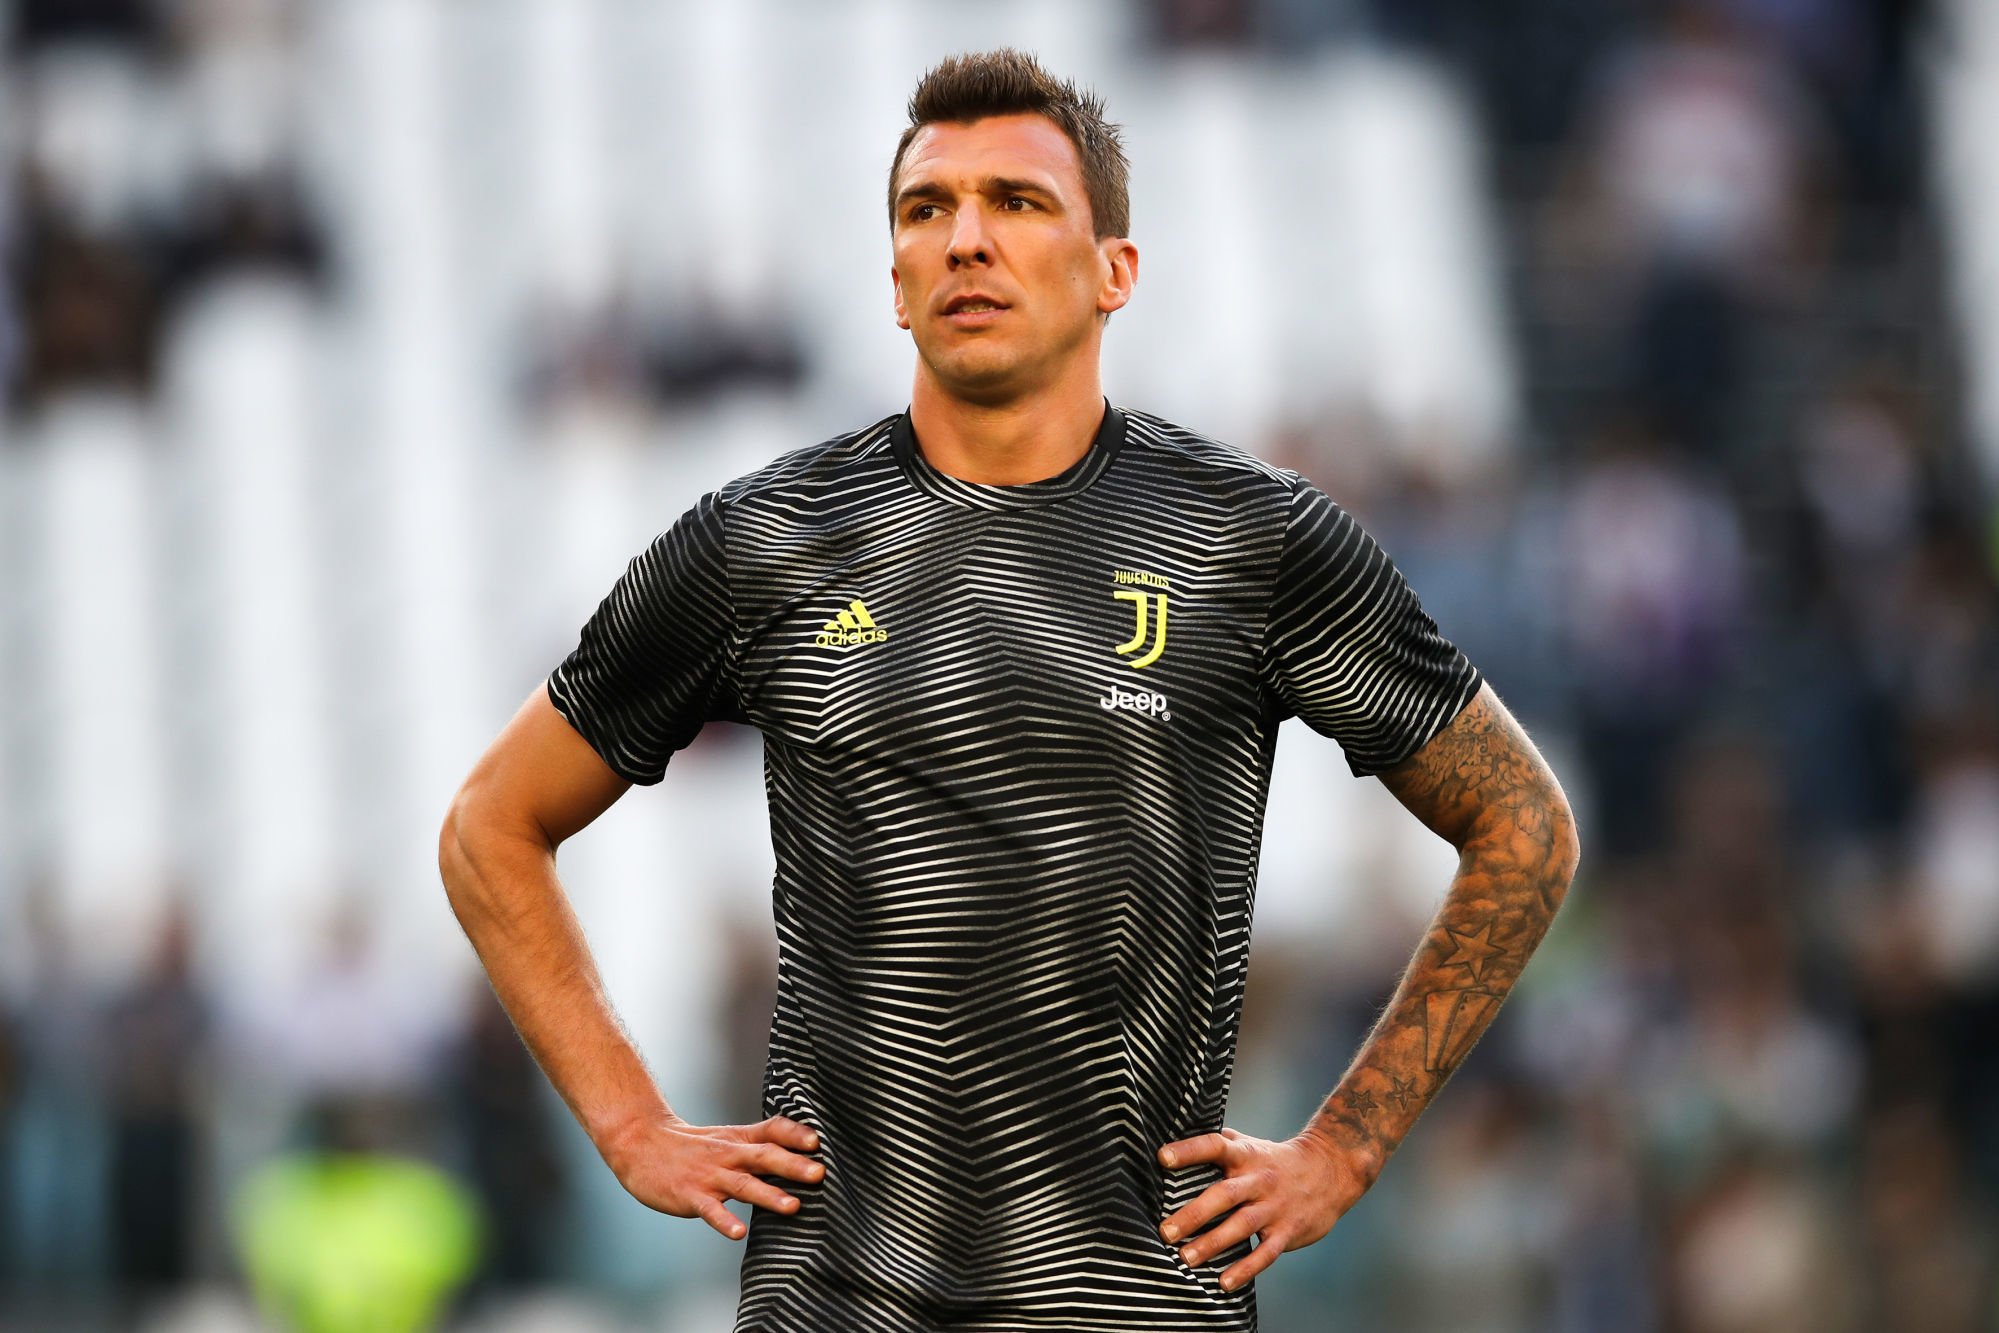 Mario Mandzukic of Juventus during the Serie A match at Allianz Stadium, Turin, Italy. Picture date: 30th March 2019. Photo : Spi / Icon Sport